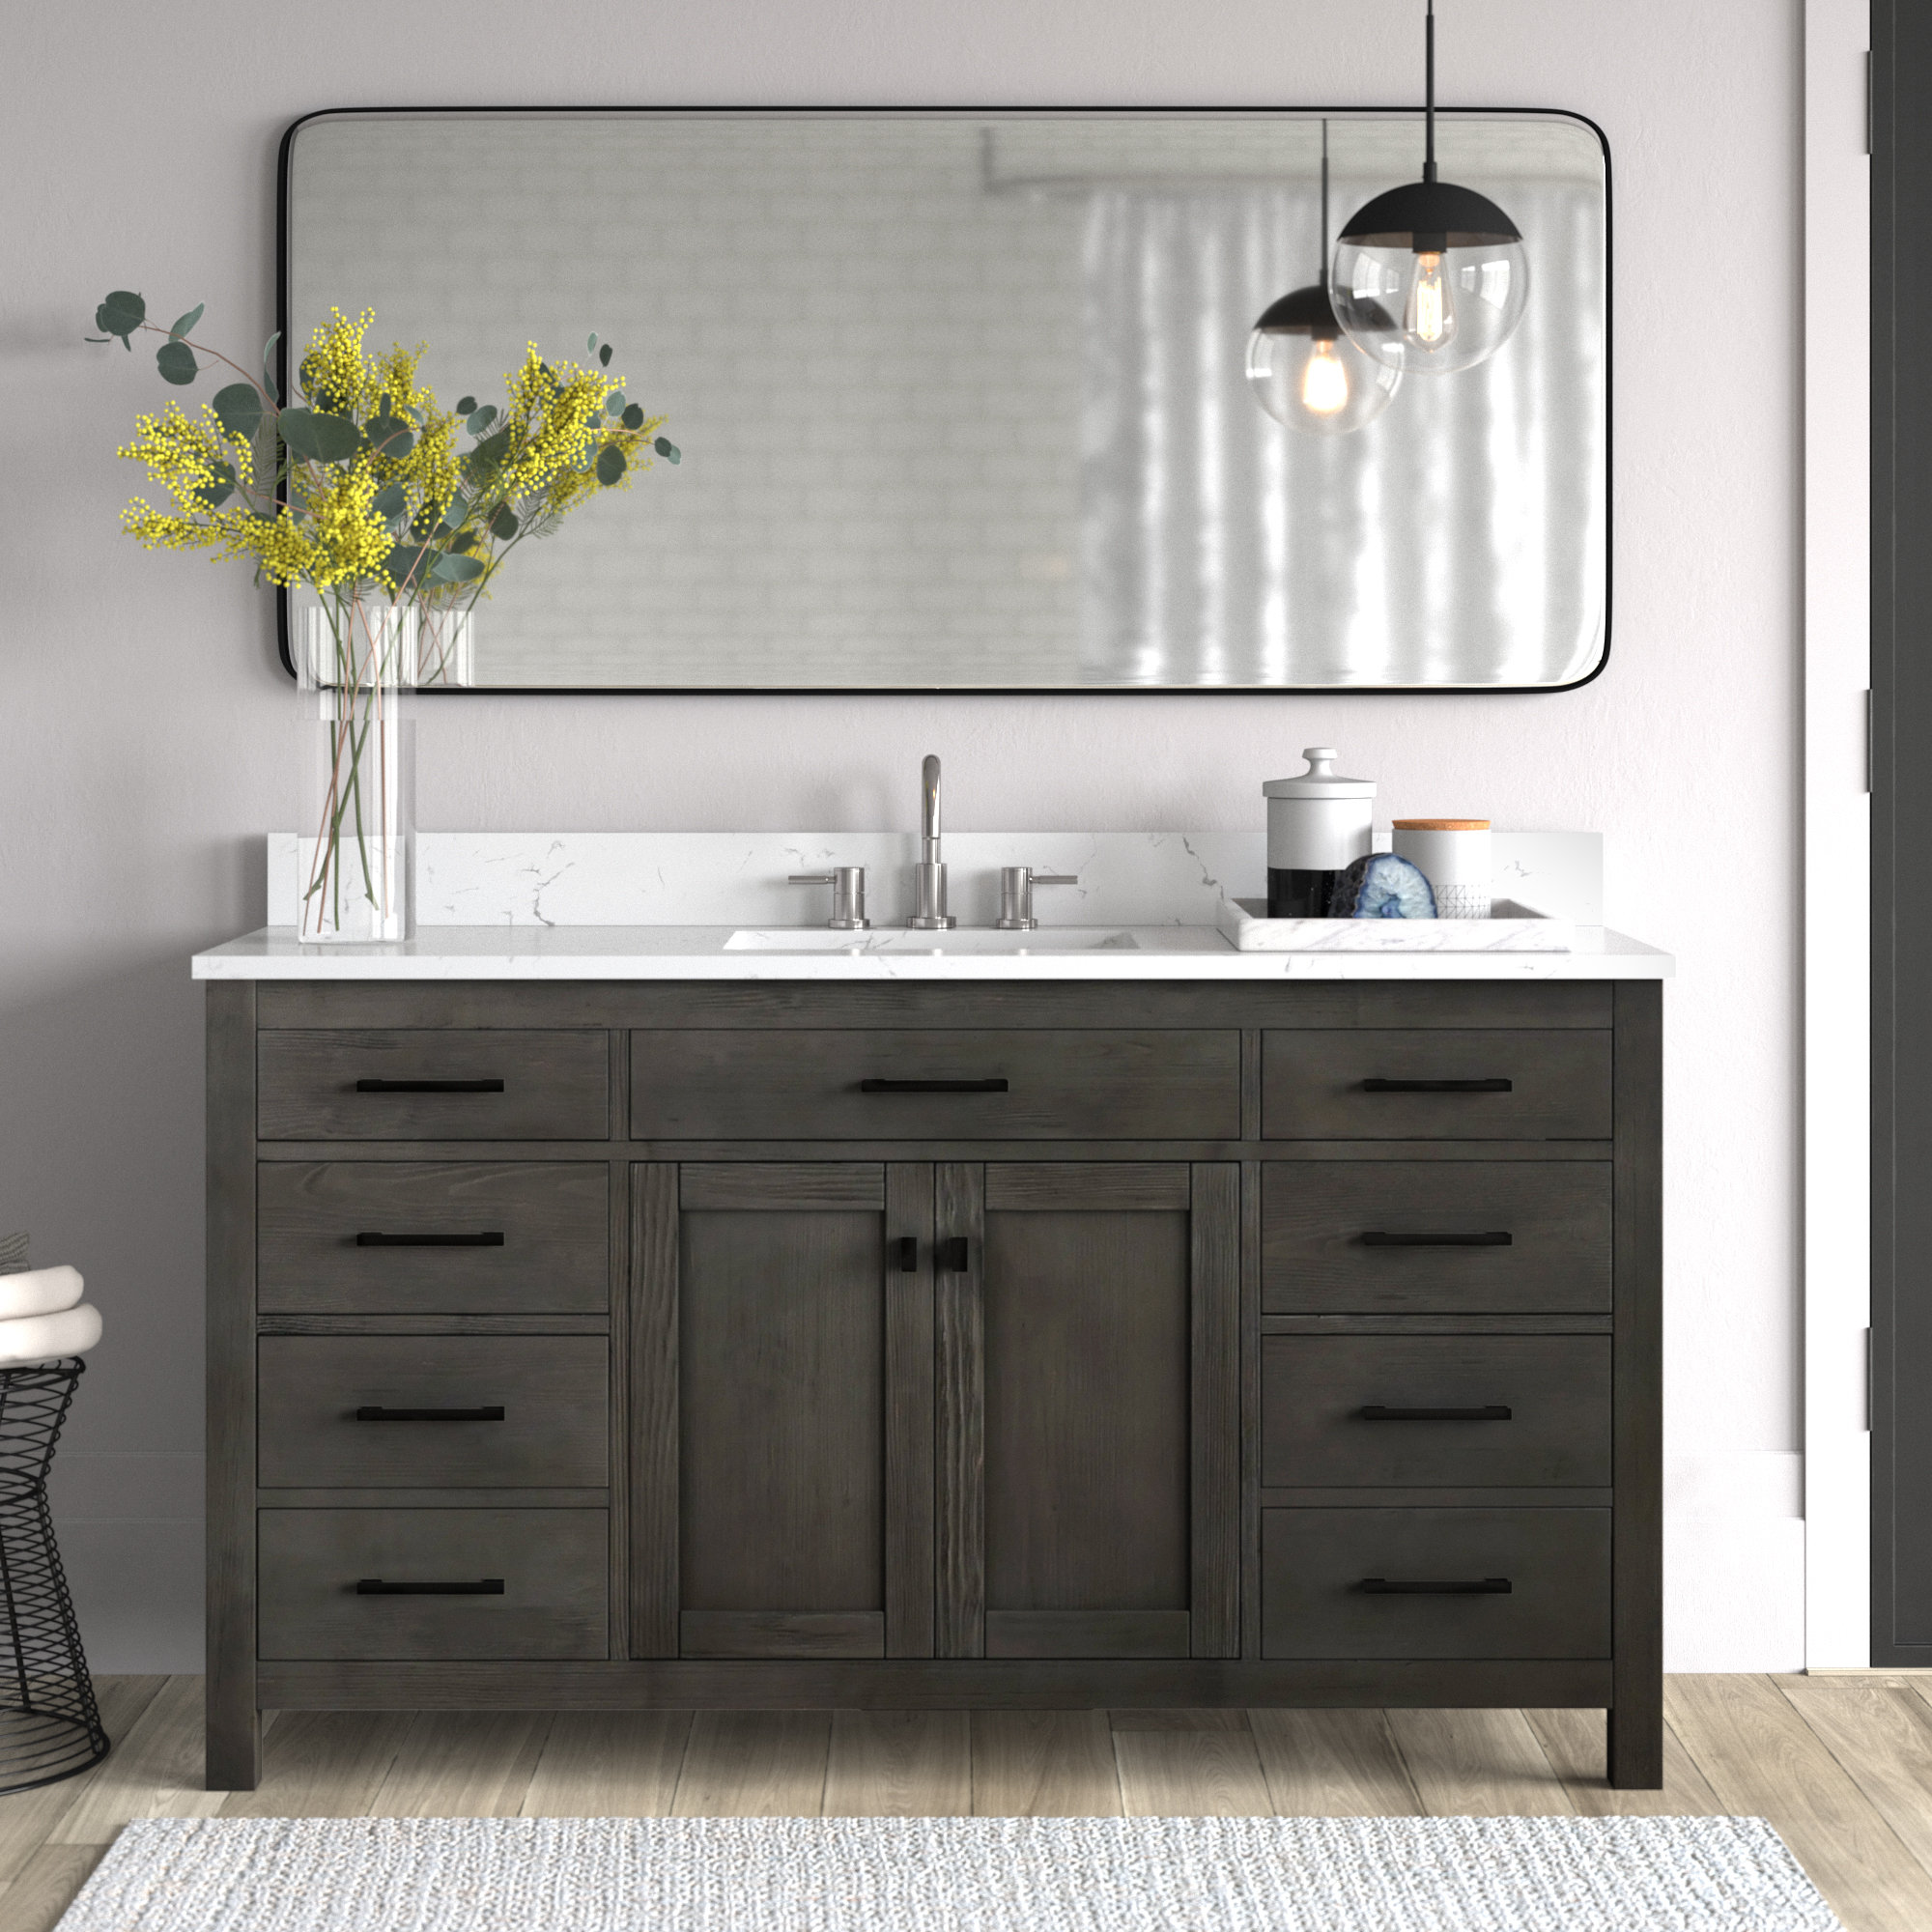 Wall Mounted Corner Bathroom Vanity Sink Combo for Small Space